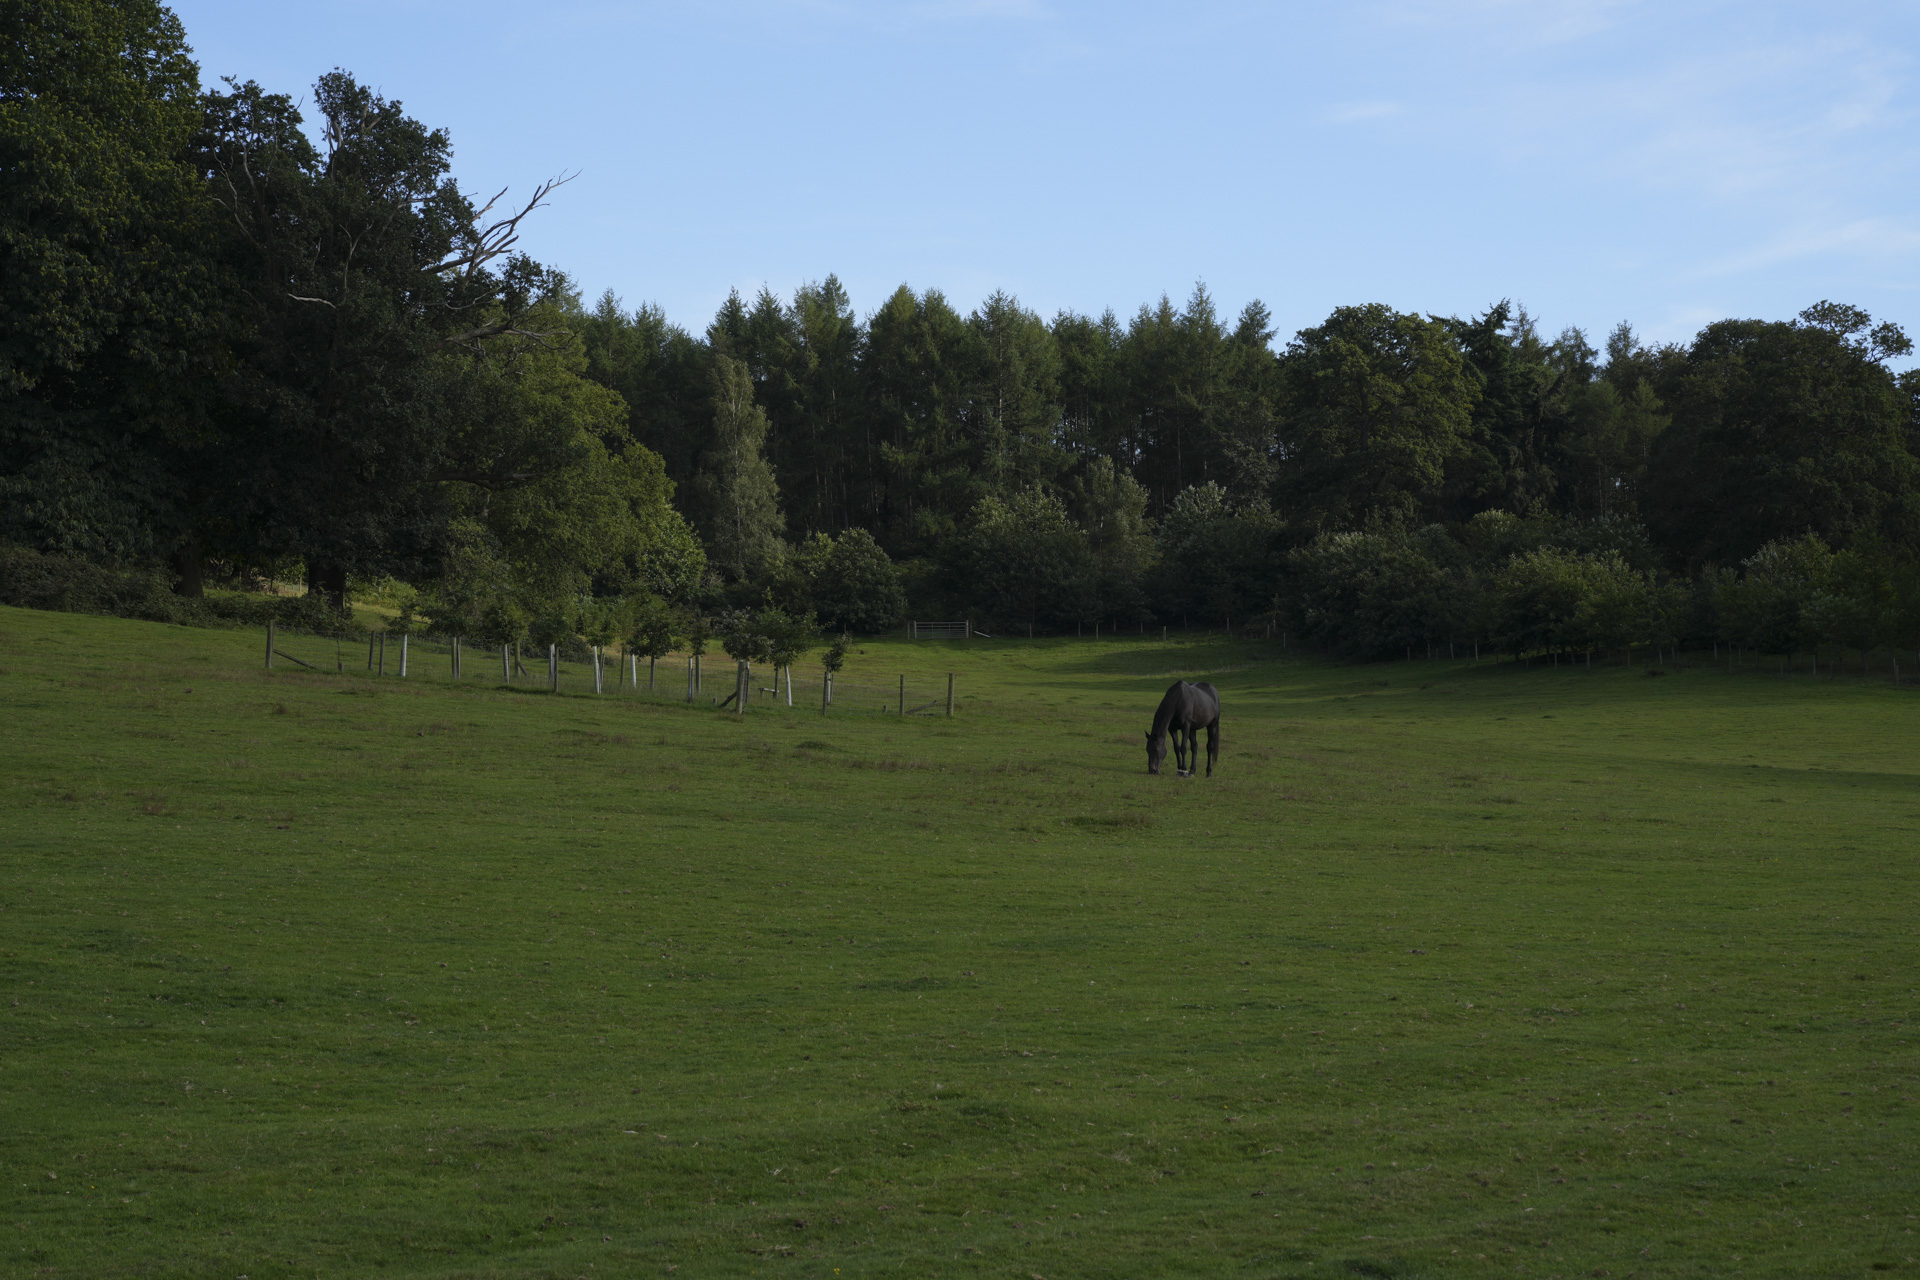 A tree-lined field with a horse on a bright day, taken with the Sony FE 20-70mm F4 lens and A7C R